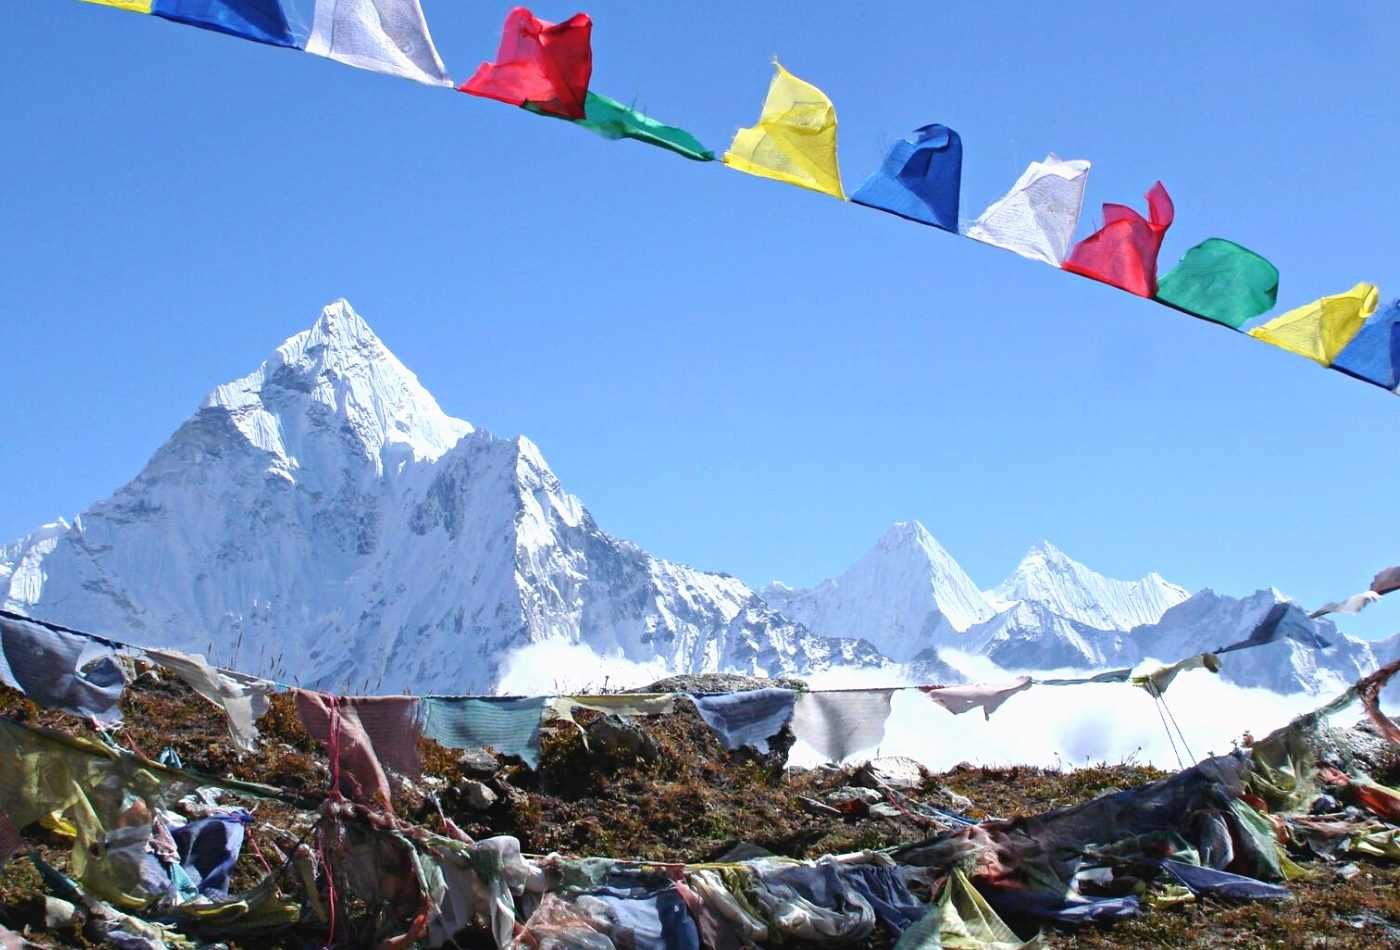 An awe-inspiring view of Mt. Amadablam, with its snow-covered summit, as seen from Thukla with colorful prayer flags fluttering in the wind. 